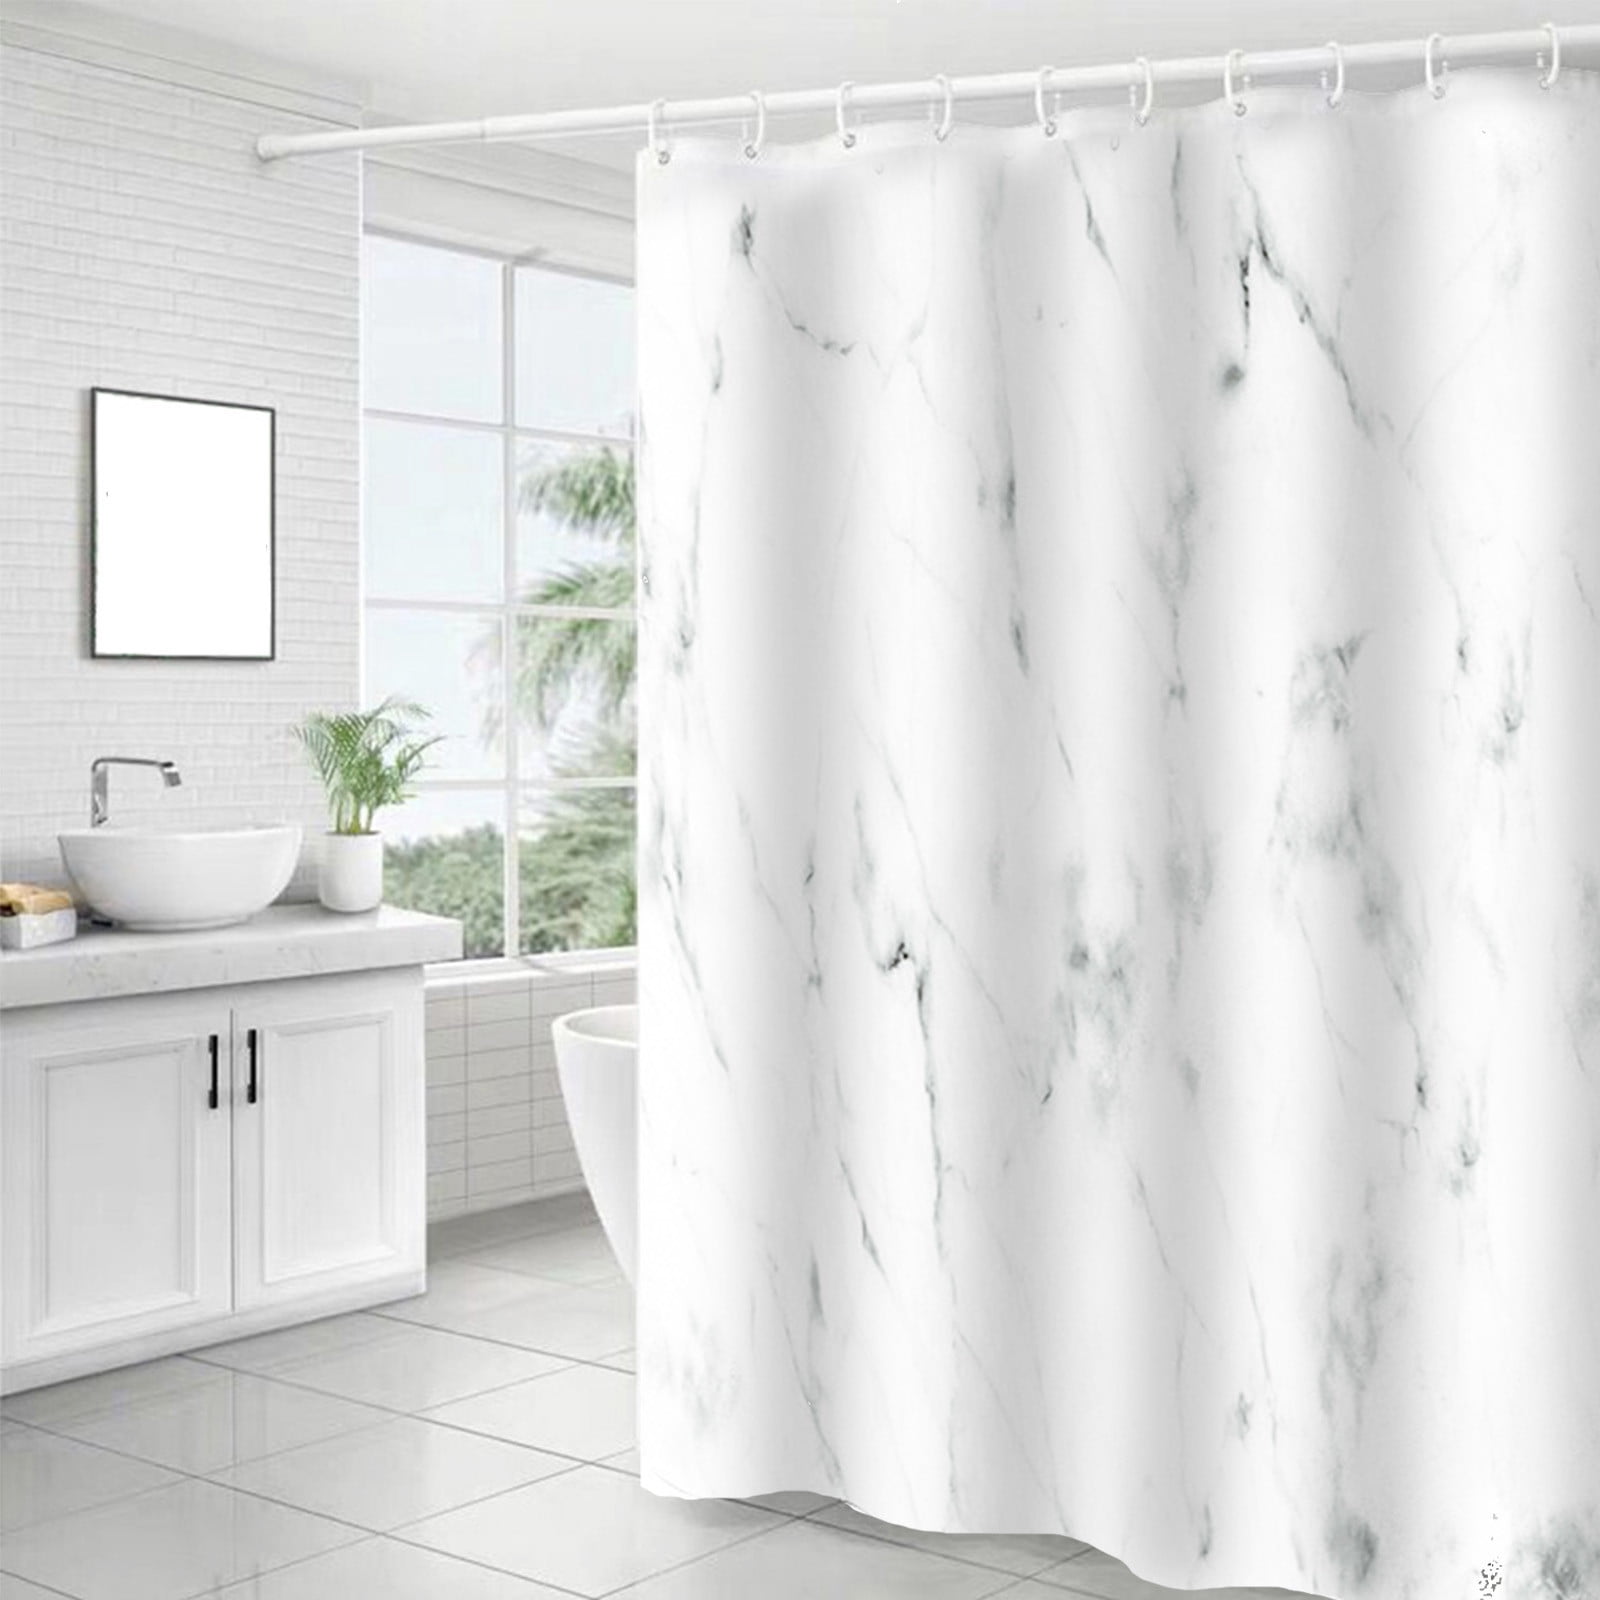 QISIWOLE Marble Bathroom Shower Curtain,Grey and White Fabric Shower Curtain  with Hooks,Unique 3D Printing,Decorative Bathroom Accessories,Water  Proof,Reinforced Metal Grommets,Standard 79x87 Inches 